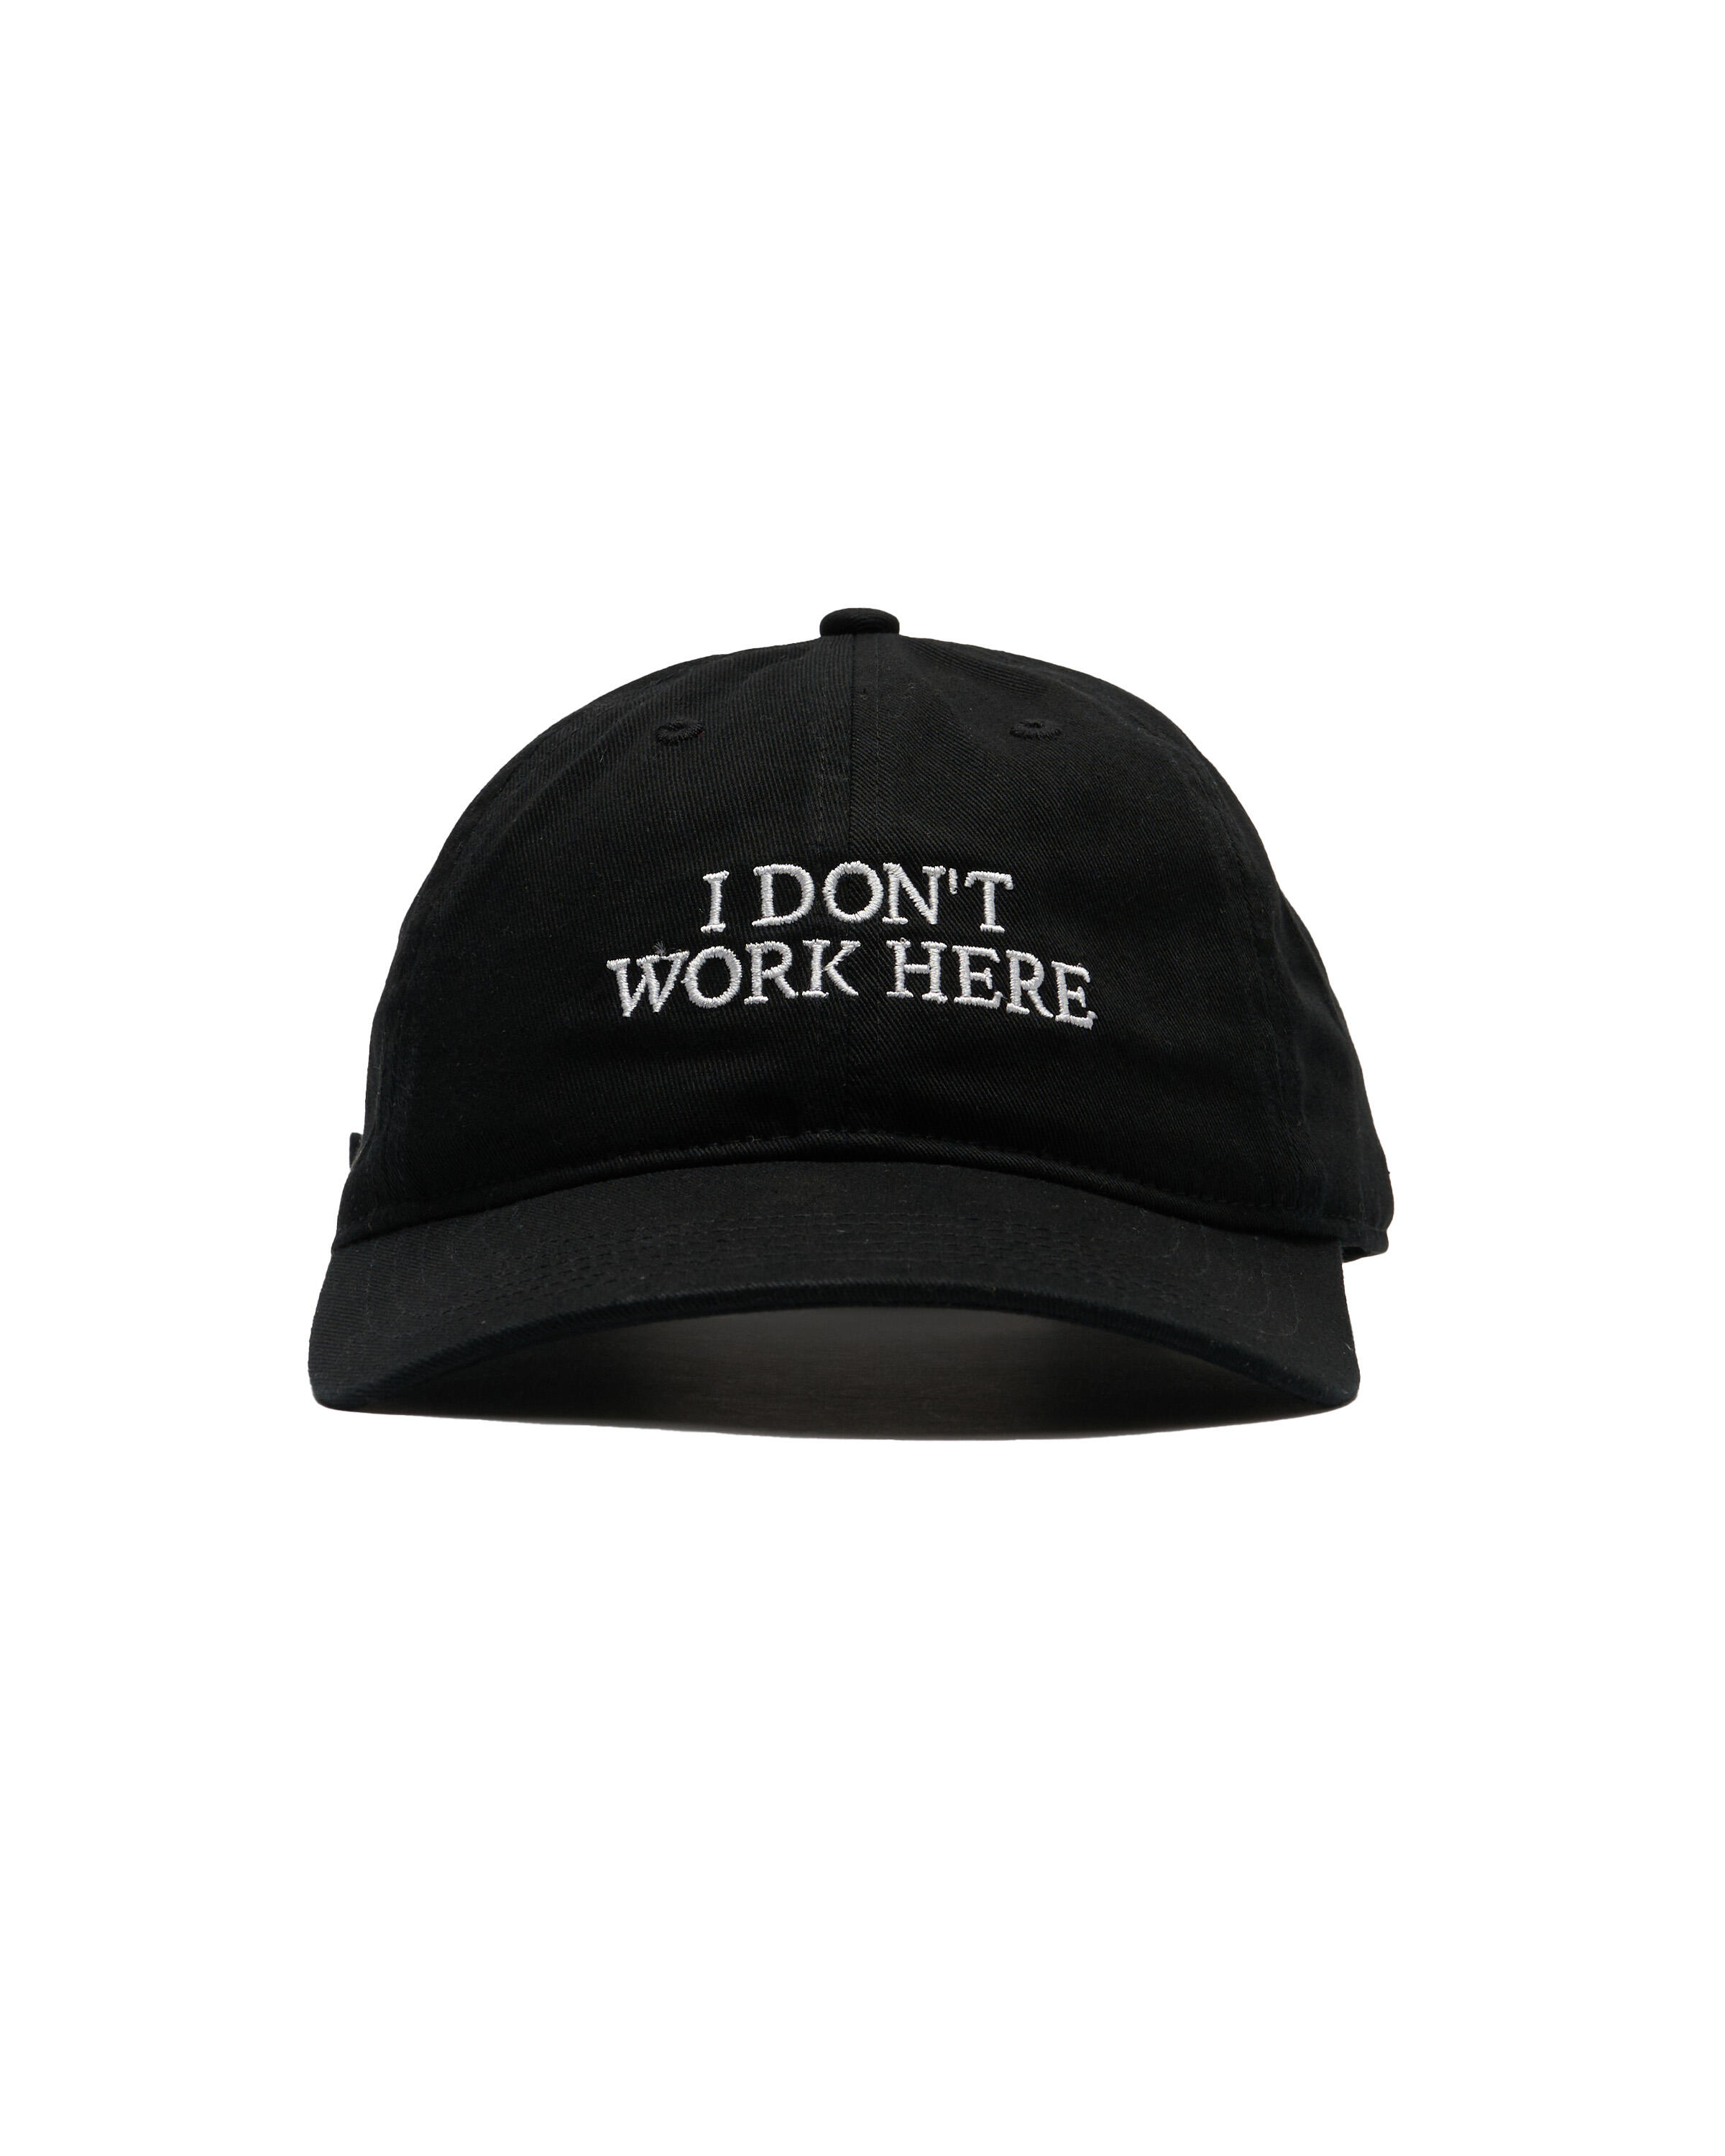 IDEA SORRY I DON'T WORK HERE HAT